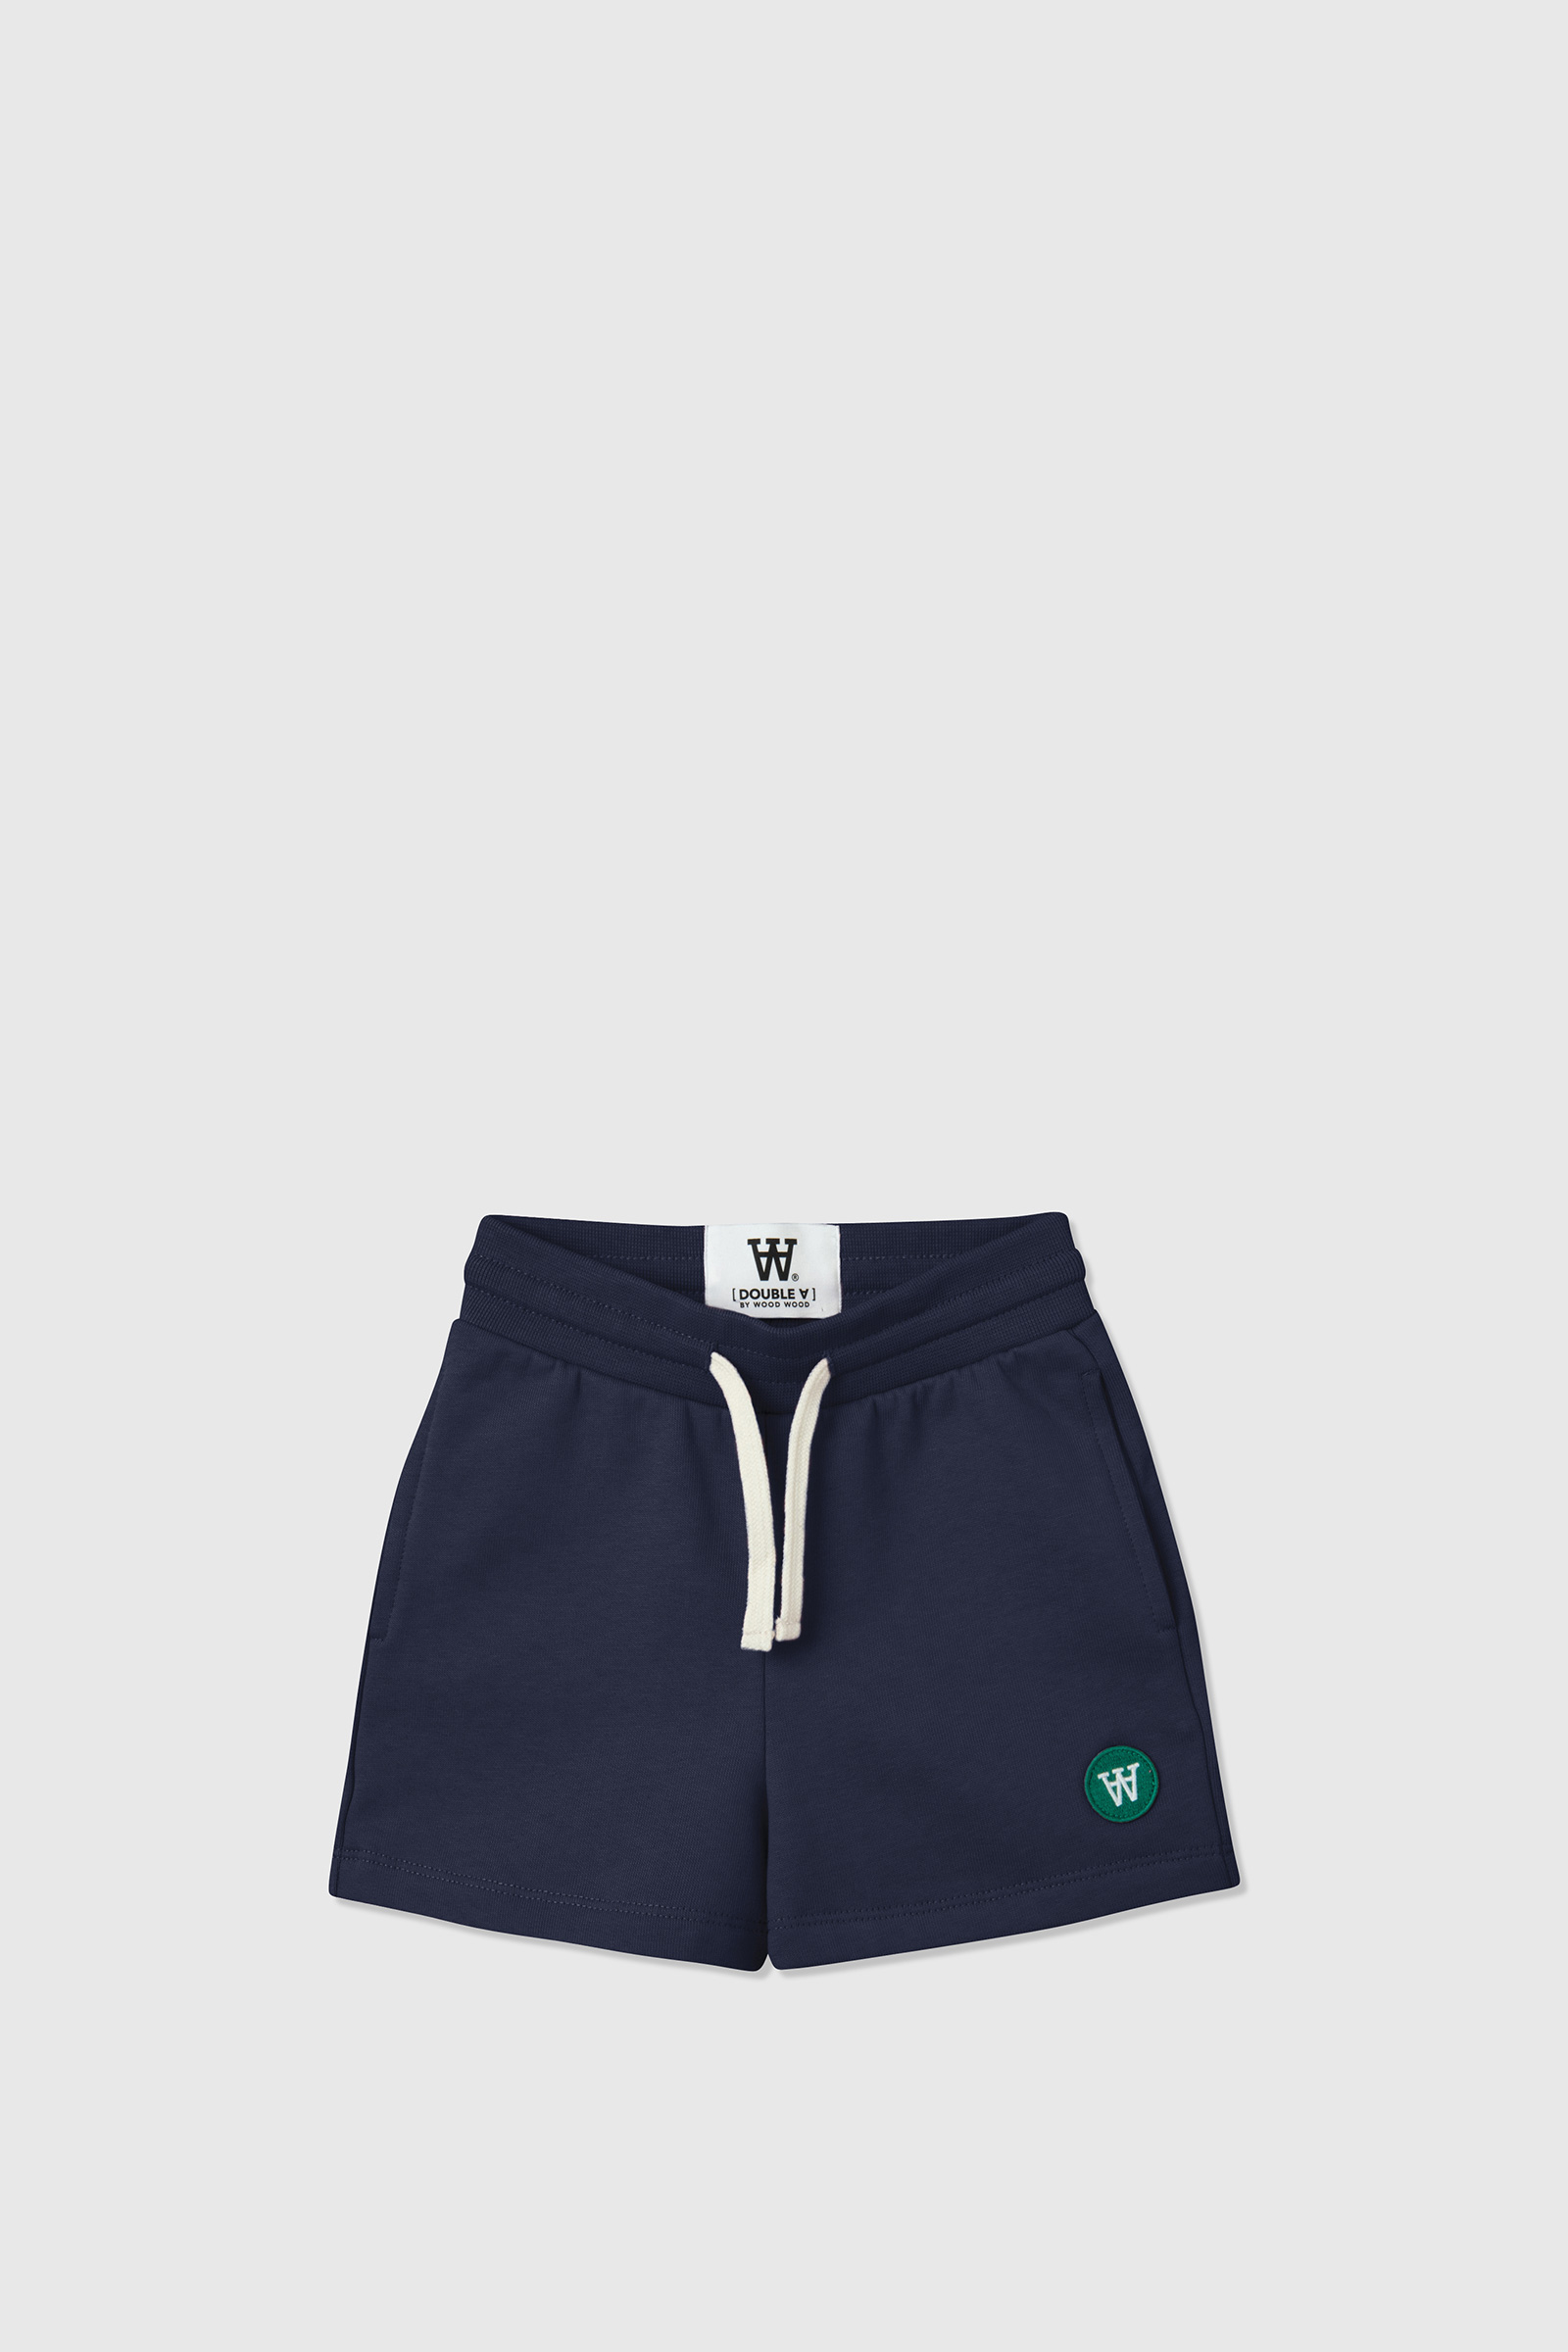 Double A by Wood Wood Vic kids shorts Navy | WoodWood.com